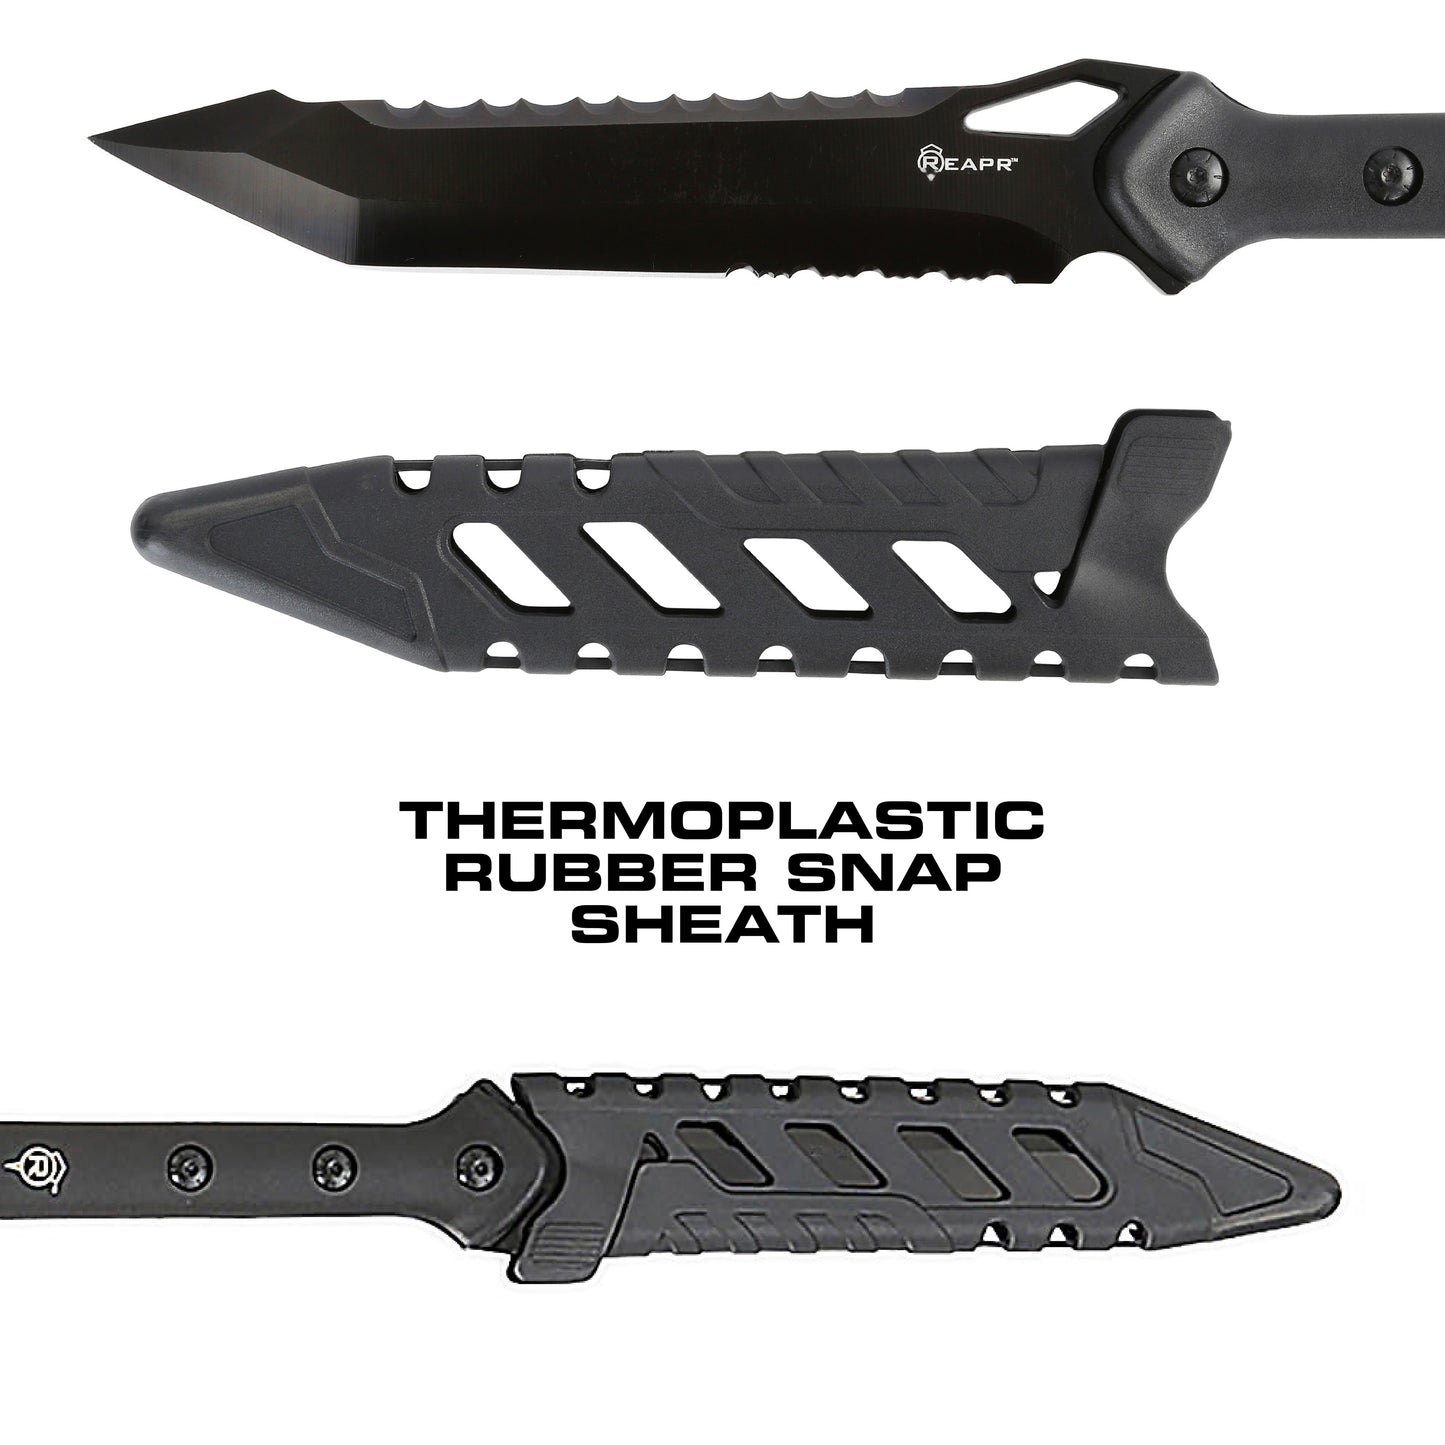 REAPR 11022 TAC Javelin Serrated Spear cuts, chops, saws, and thrusts efficiently and effectively.